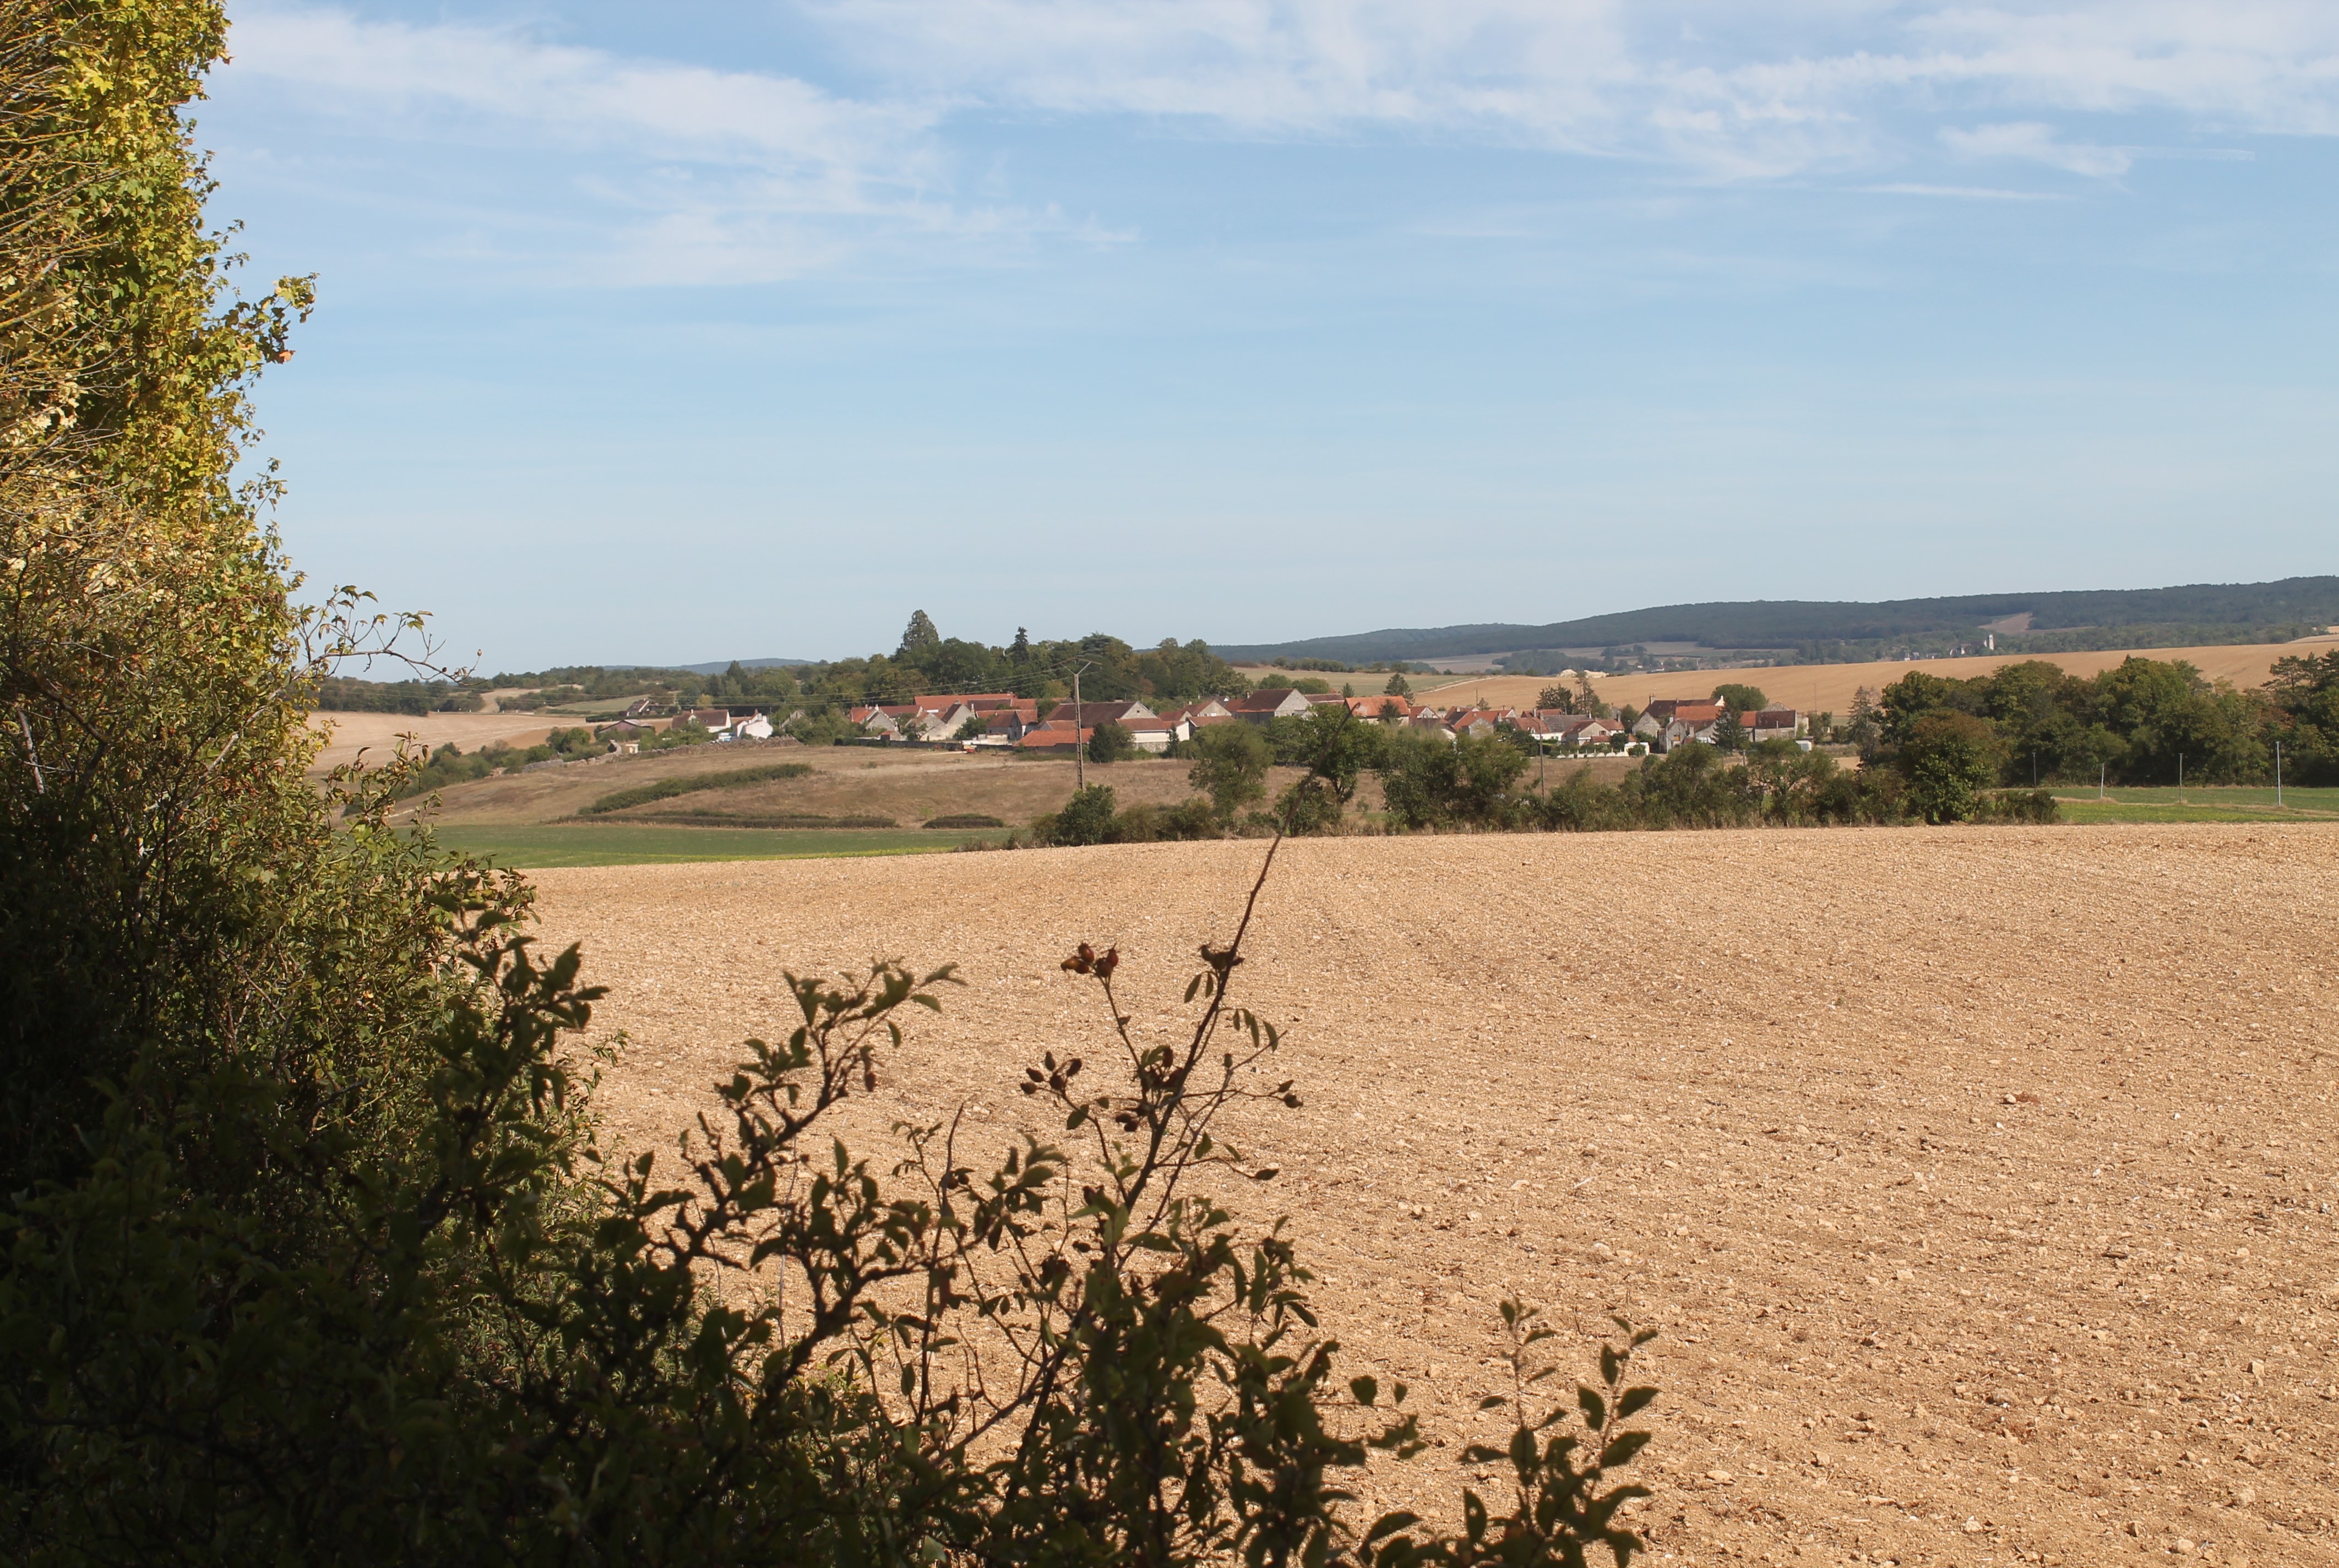 Looking back from Crain across Le Paumier to the memorial with Chatel Censoir in the background (from Nicholas Vincent)